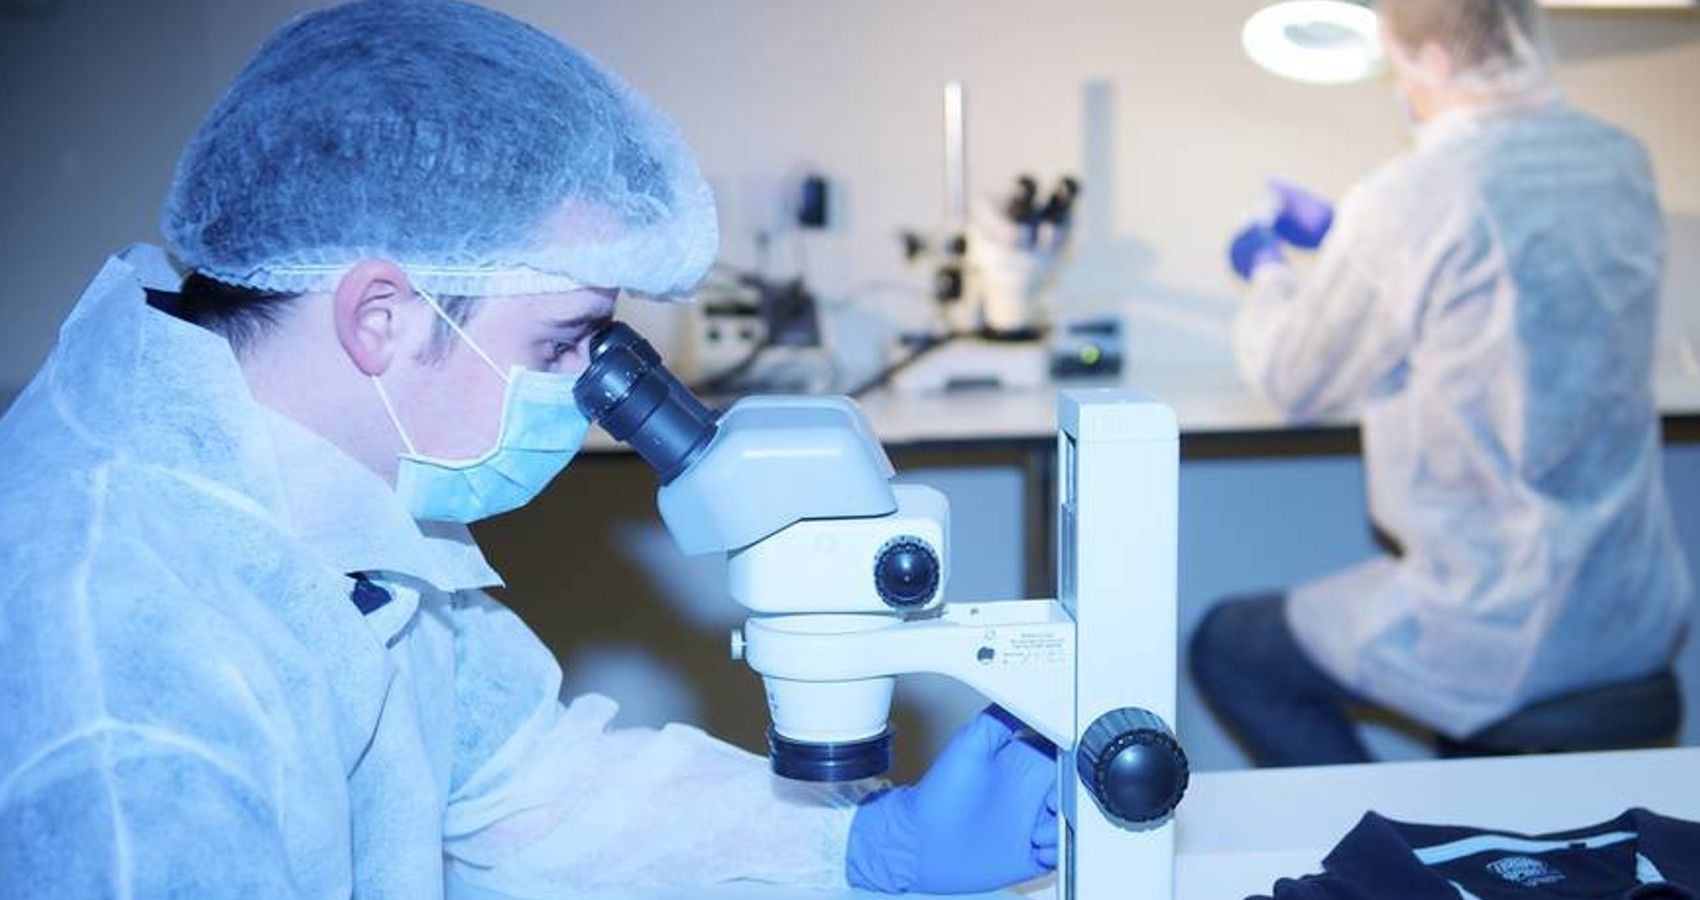 A scientist working with a microscope in a lab